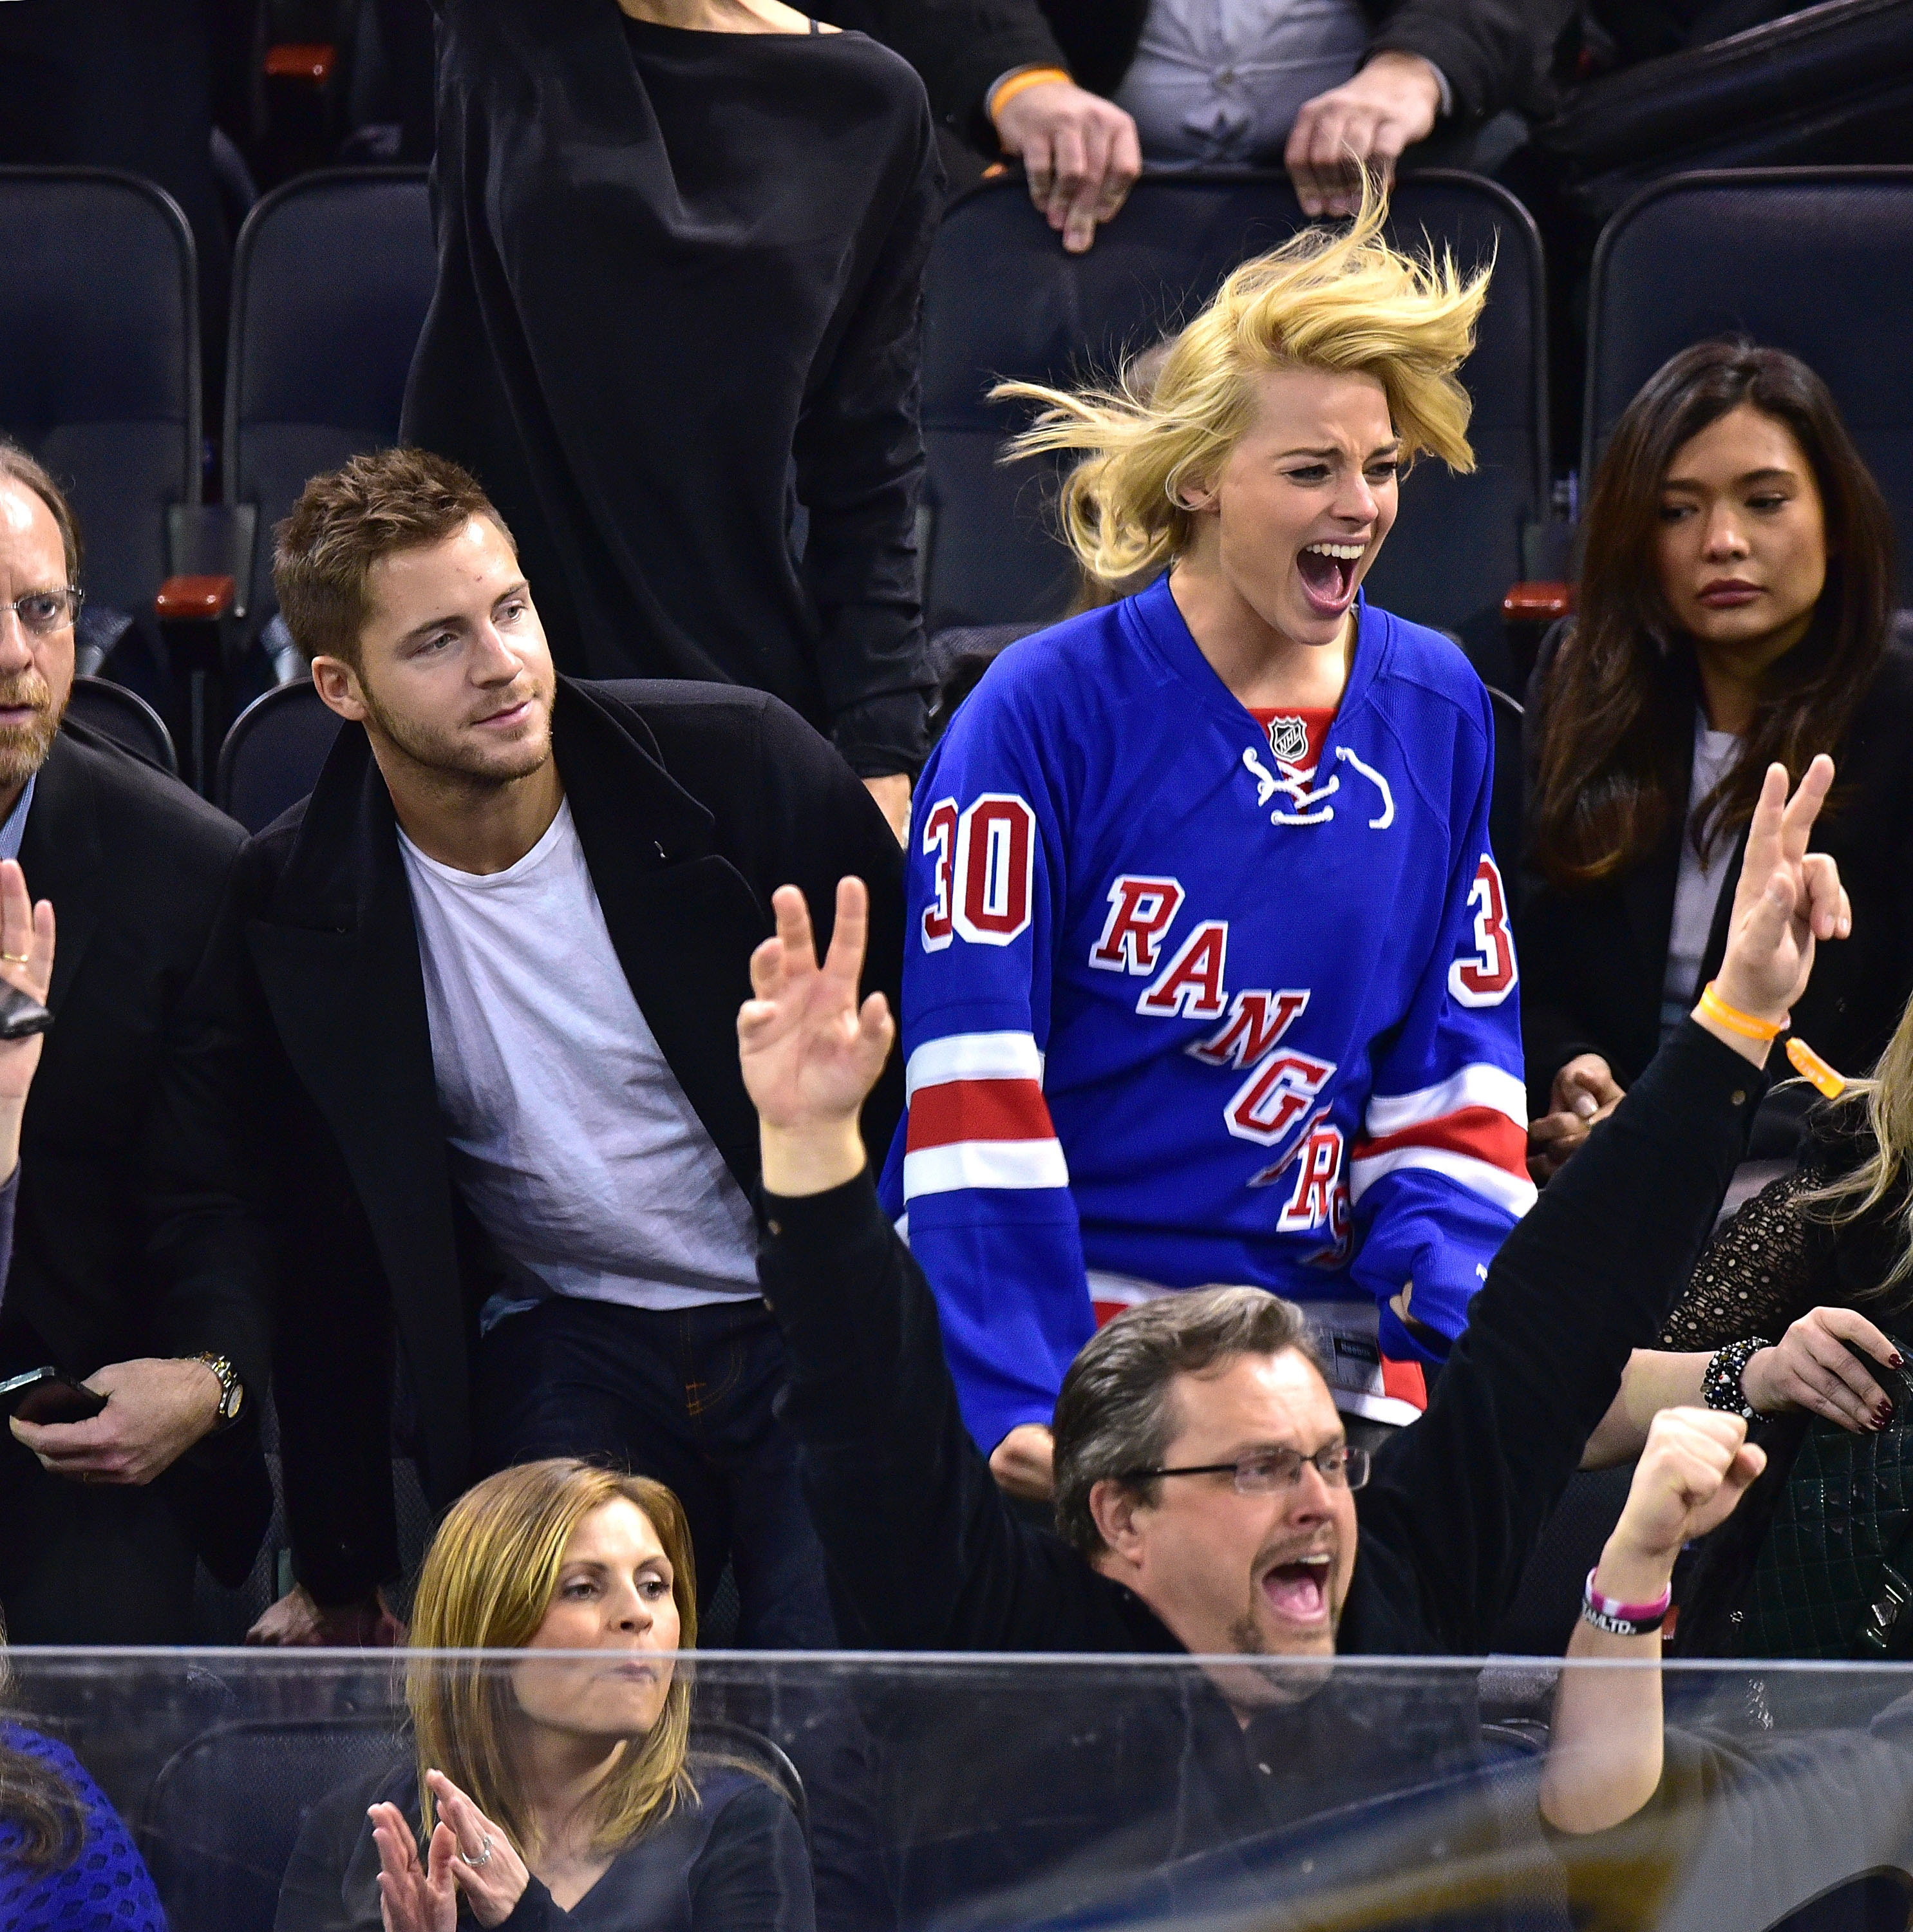 the two at a hockey game cheering